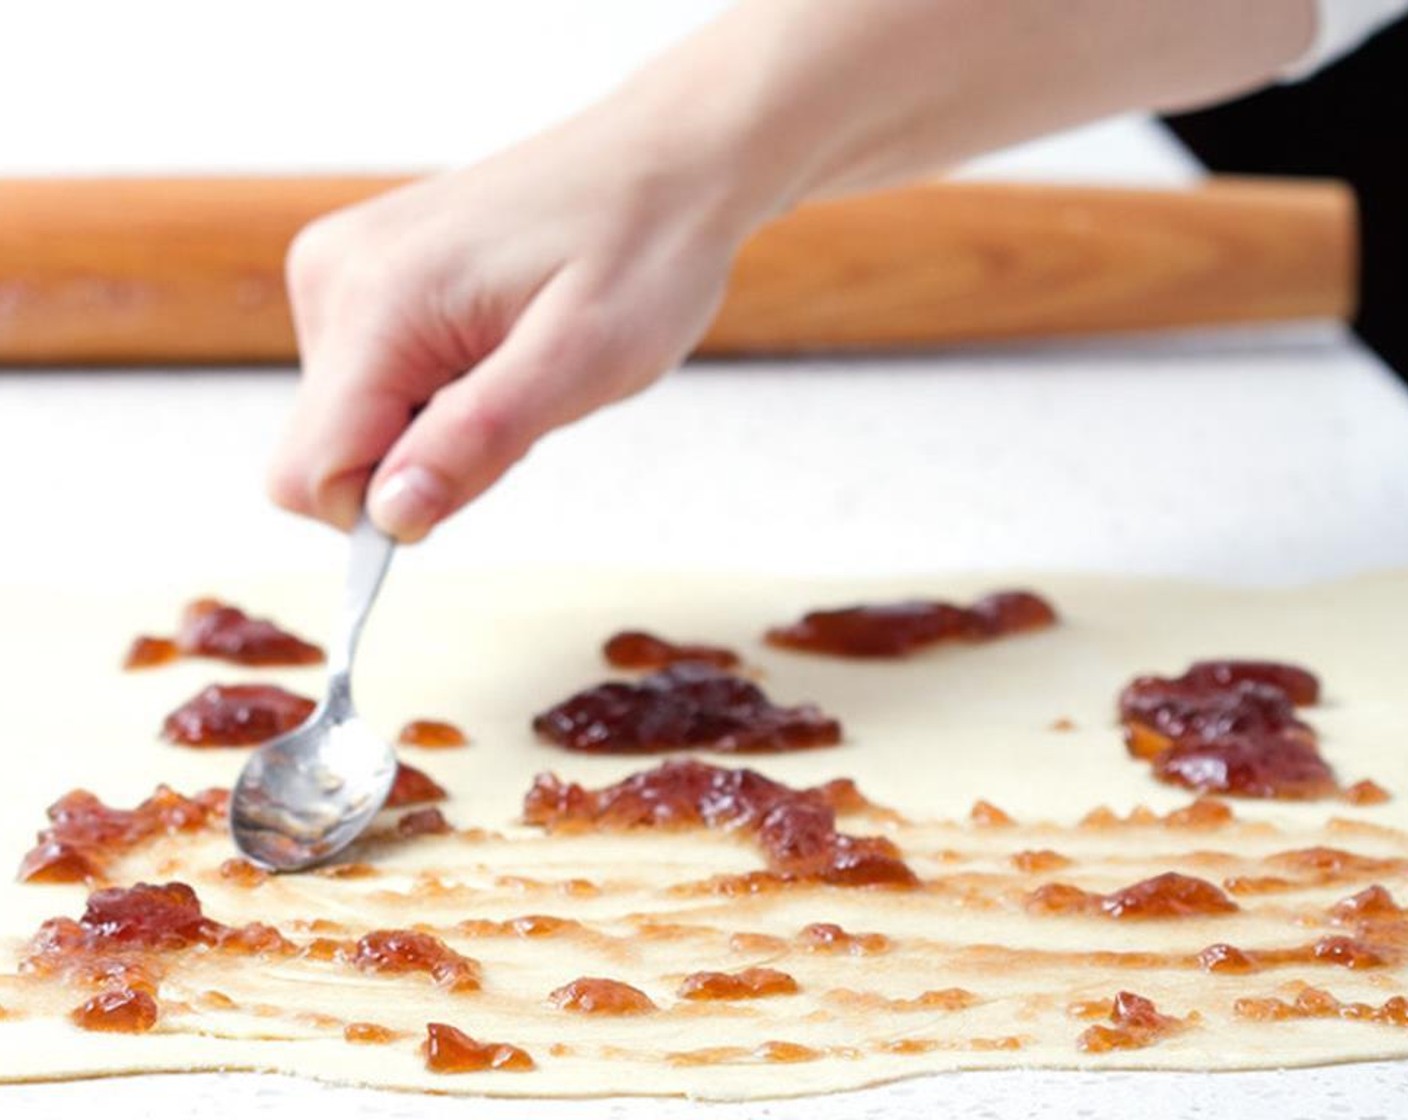 step 4 Spread the Just Jan’s® Pomegranate Fruit Spread (3/4 cup) evenly over the top of the pastry sheets.